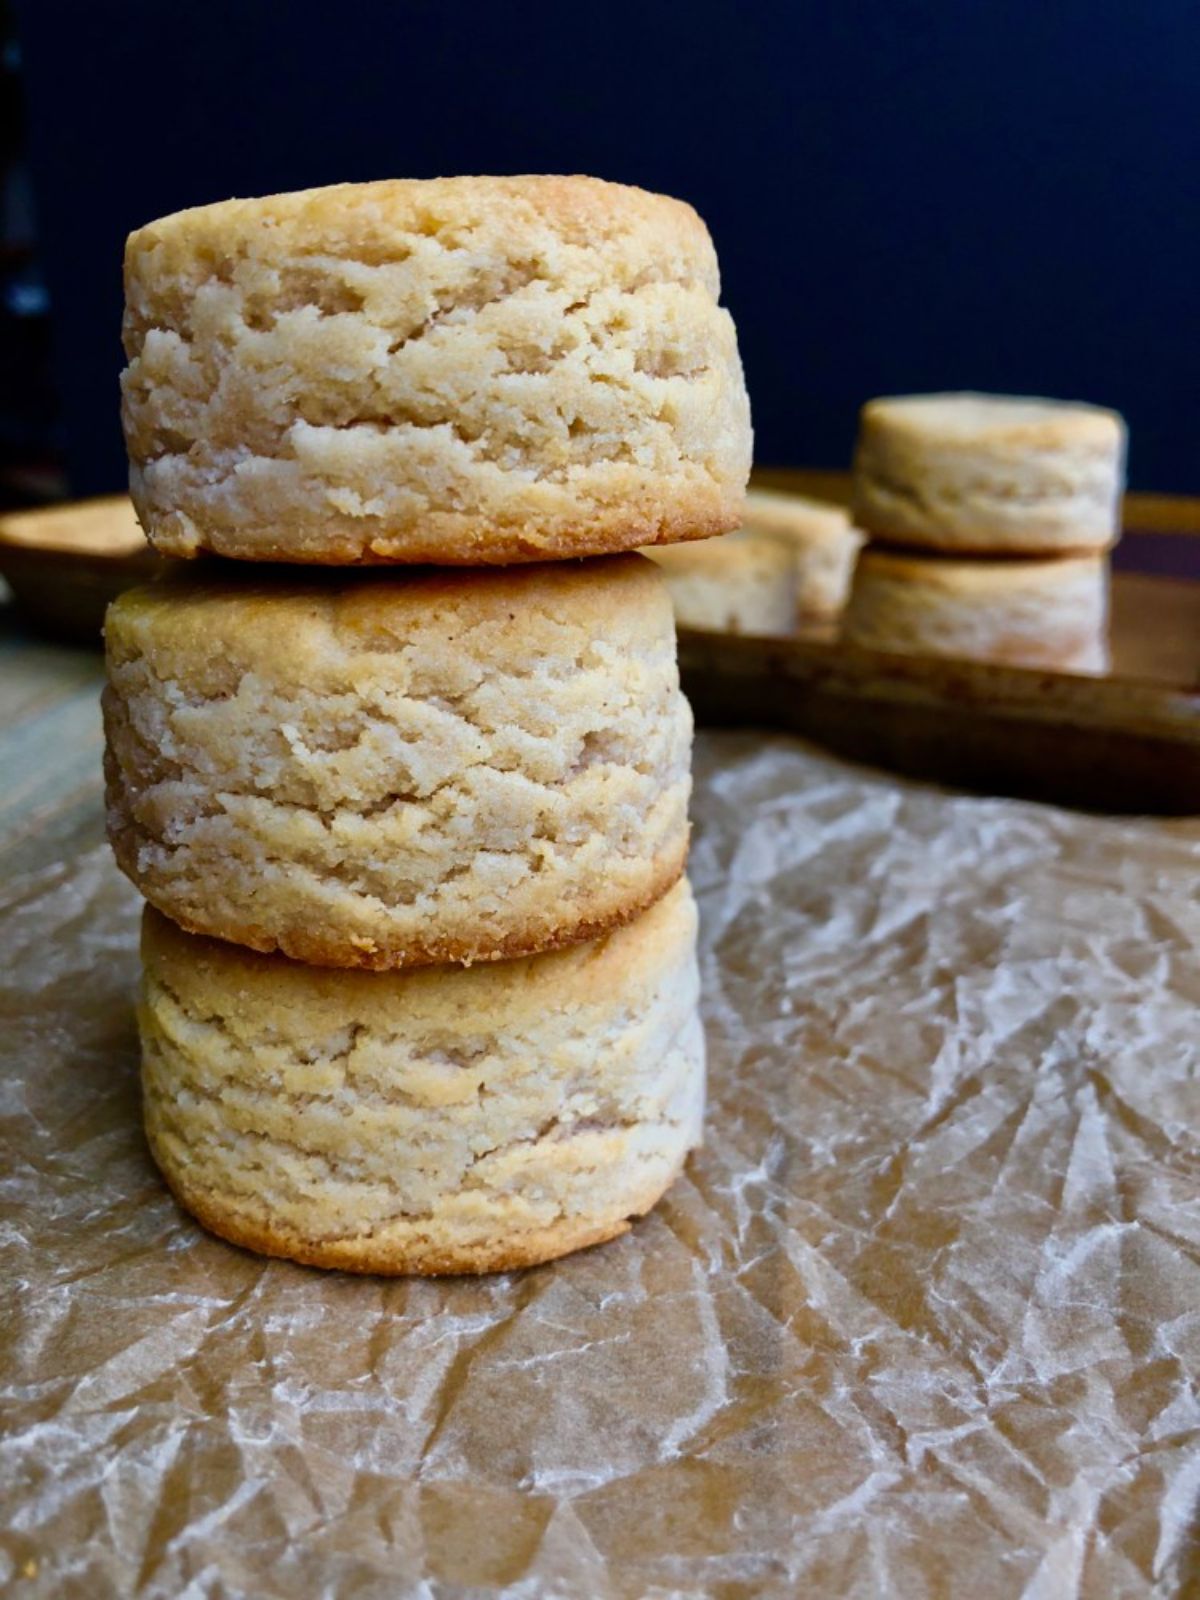 a stack of 3 biscuits, with more in a tray behind